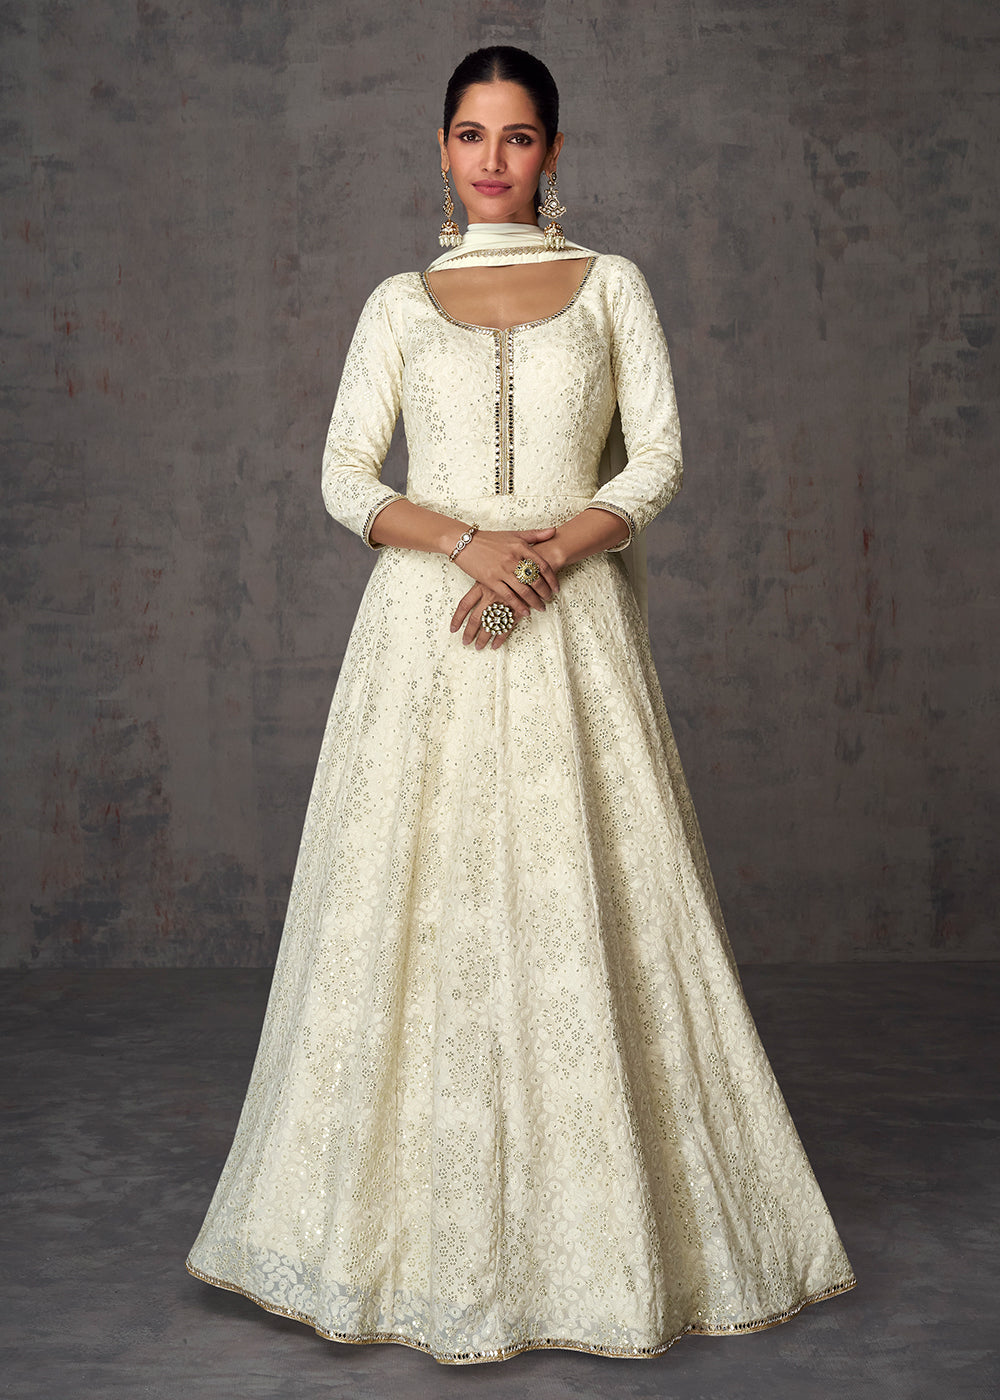 Buy Now Sequins & Faux Mirror Embroidered Indian Wedding Gown in Off White Online in USA, UK, Australia, Canada & Worldwide at Empress Clothing.